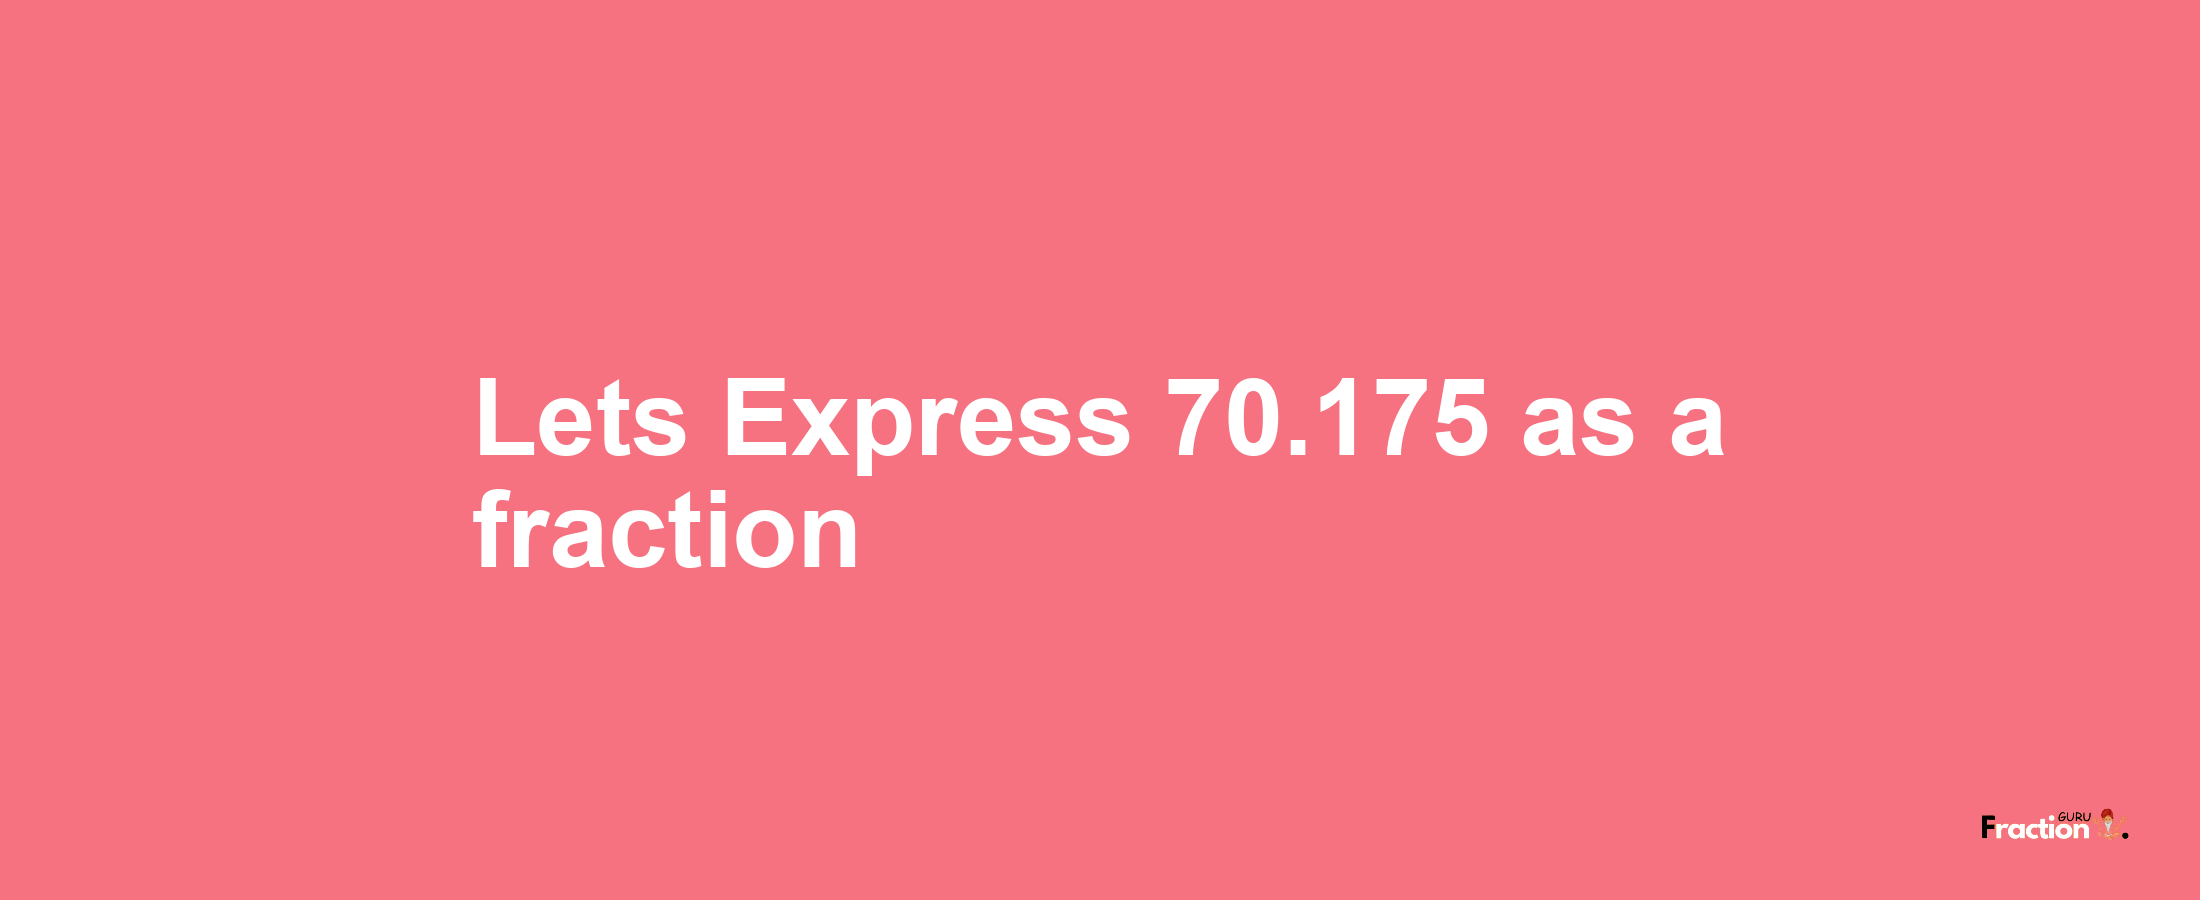 Lets Express 70.175 as afraction